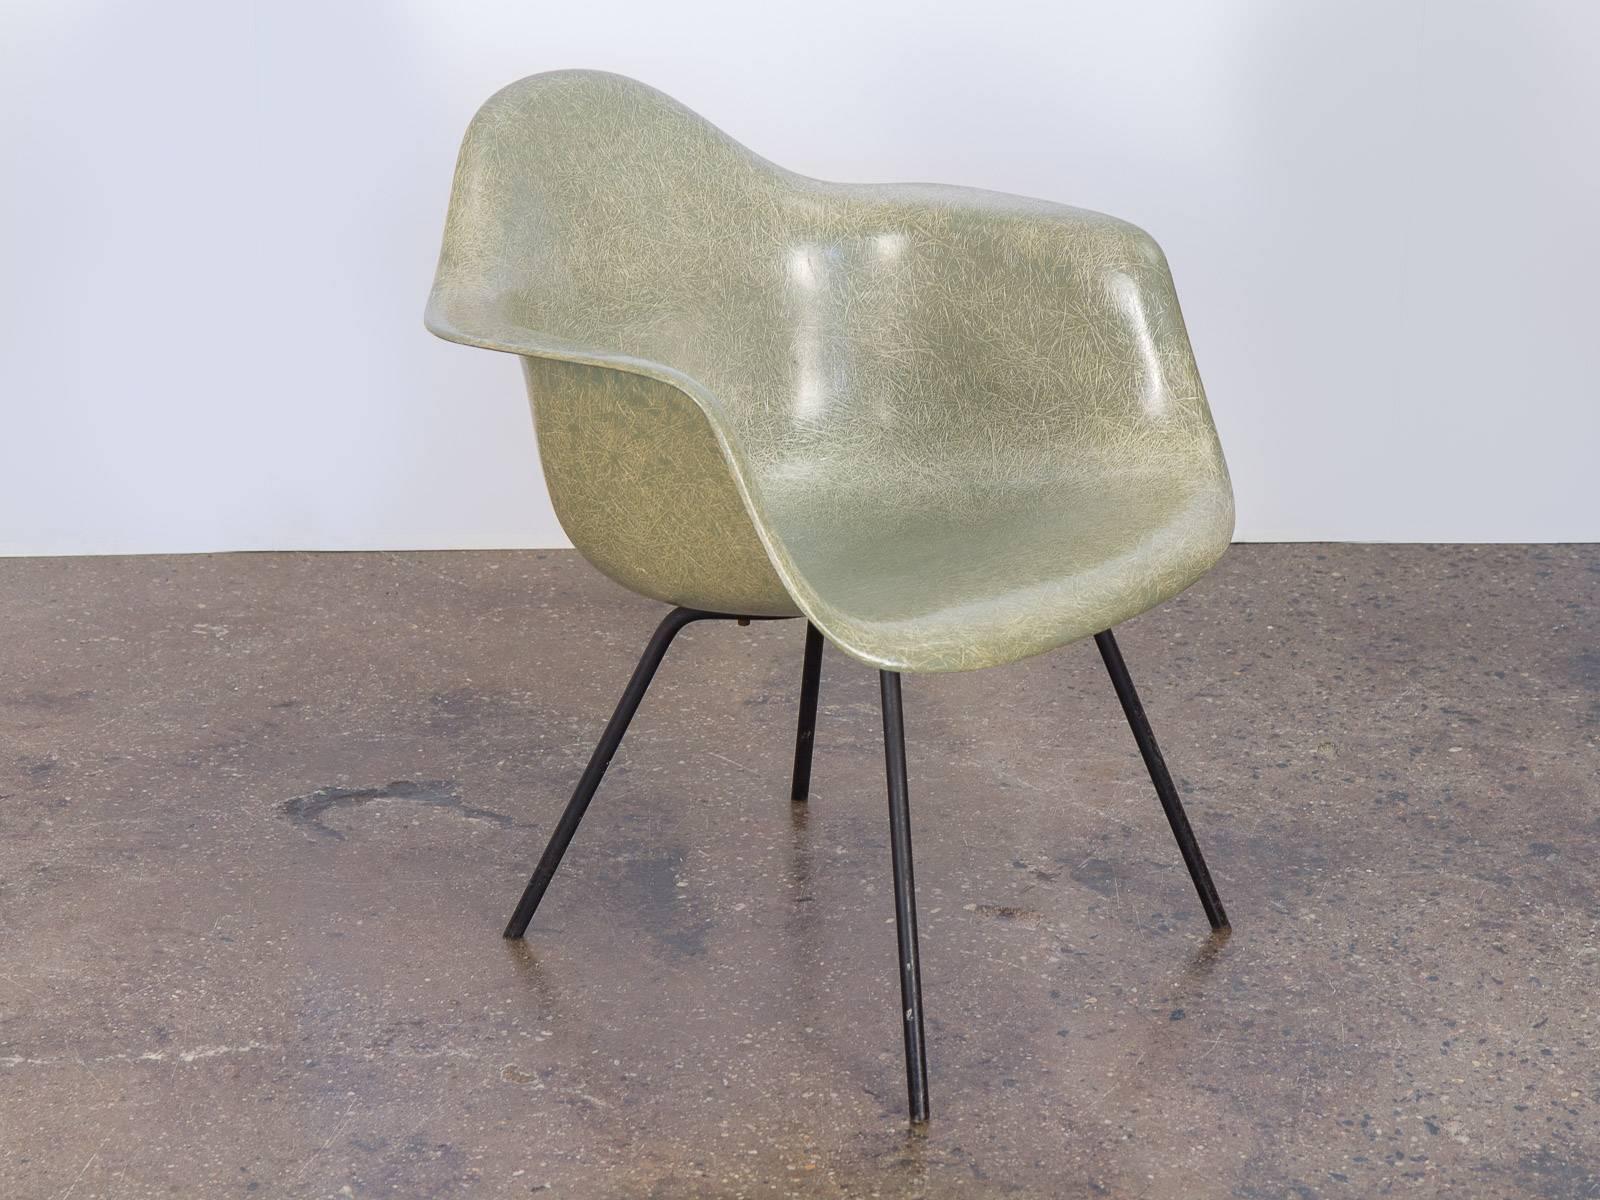 Very scarce, Second Generation Eames Armshell chair in the covetable seafoam hue on an early black steel X-base. Excellent condition. Original 1950s finish. Incredibly distinct thread, giving the surface a striking texture. Molded fiberglass is